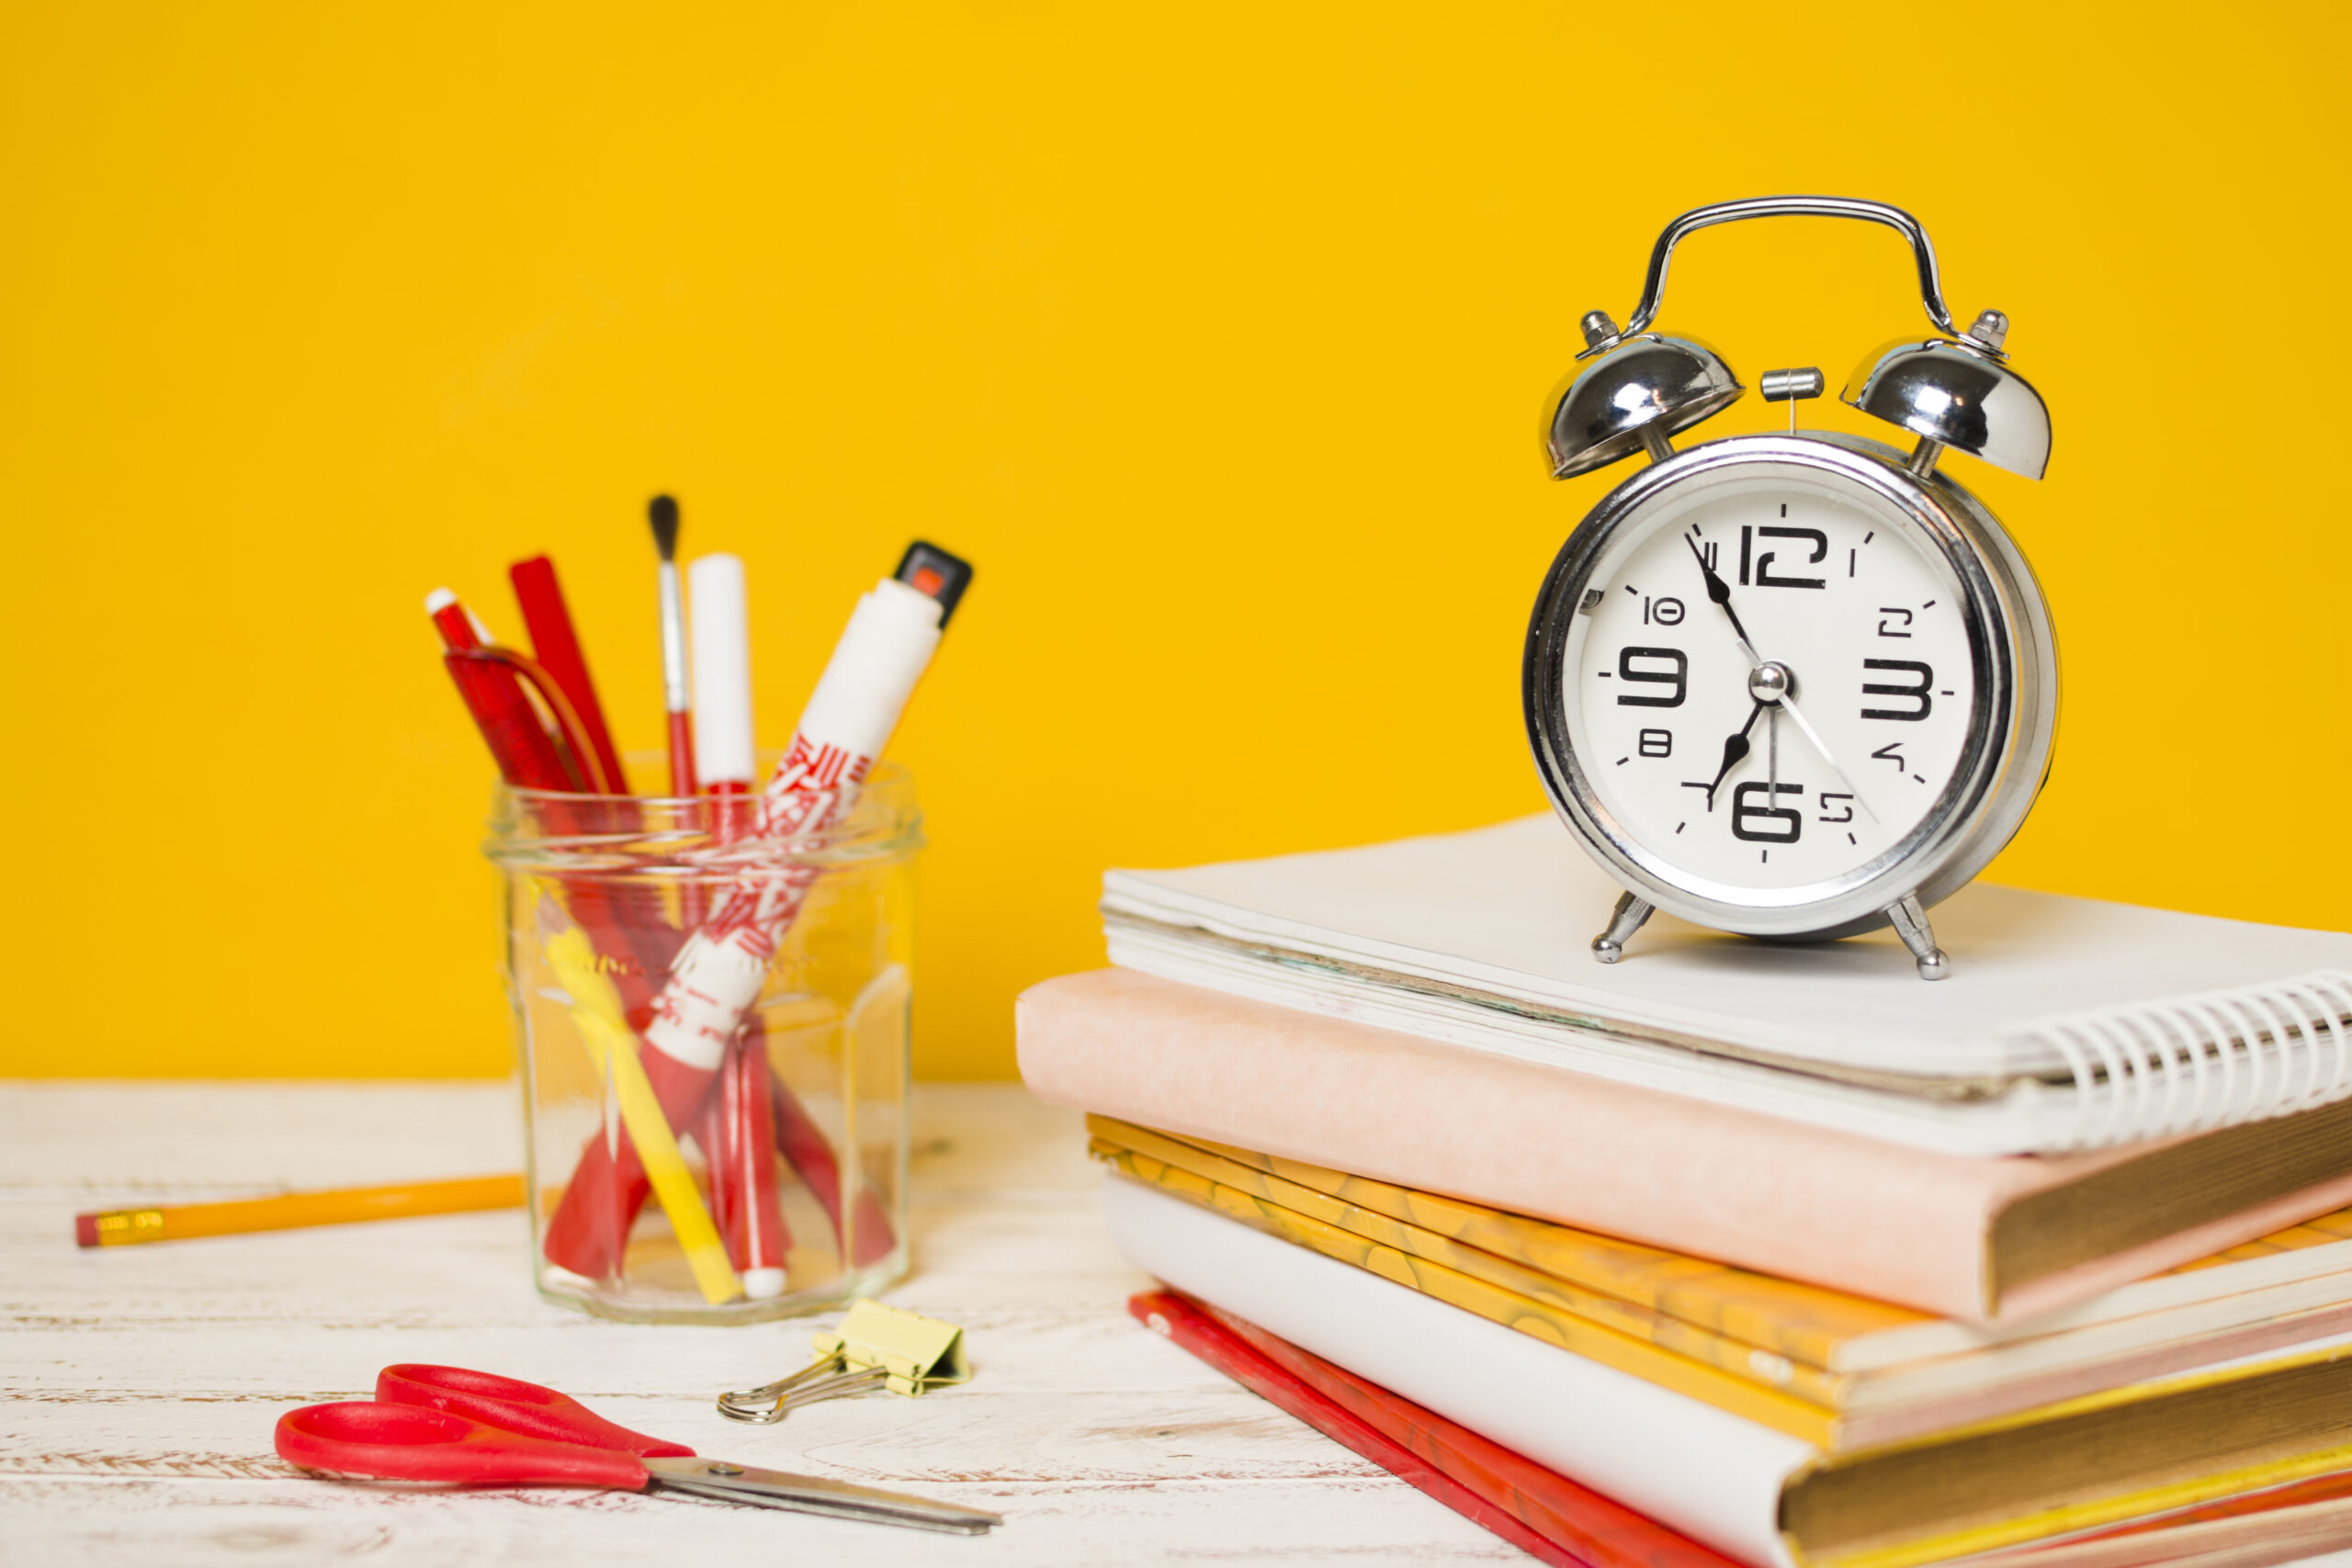 HOW TO EFFECTIVELY MANAGE YOUR TIME WHEN STUDYING AND WORKING